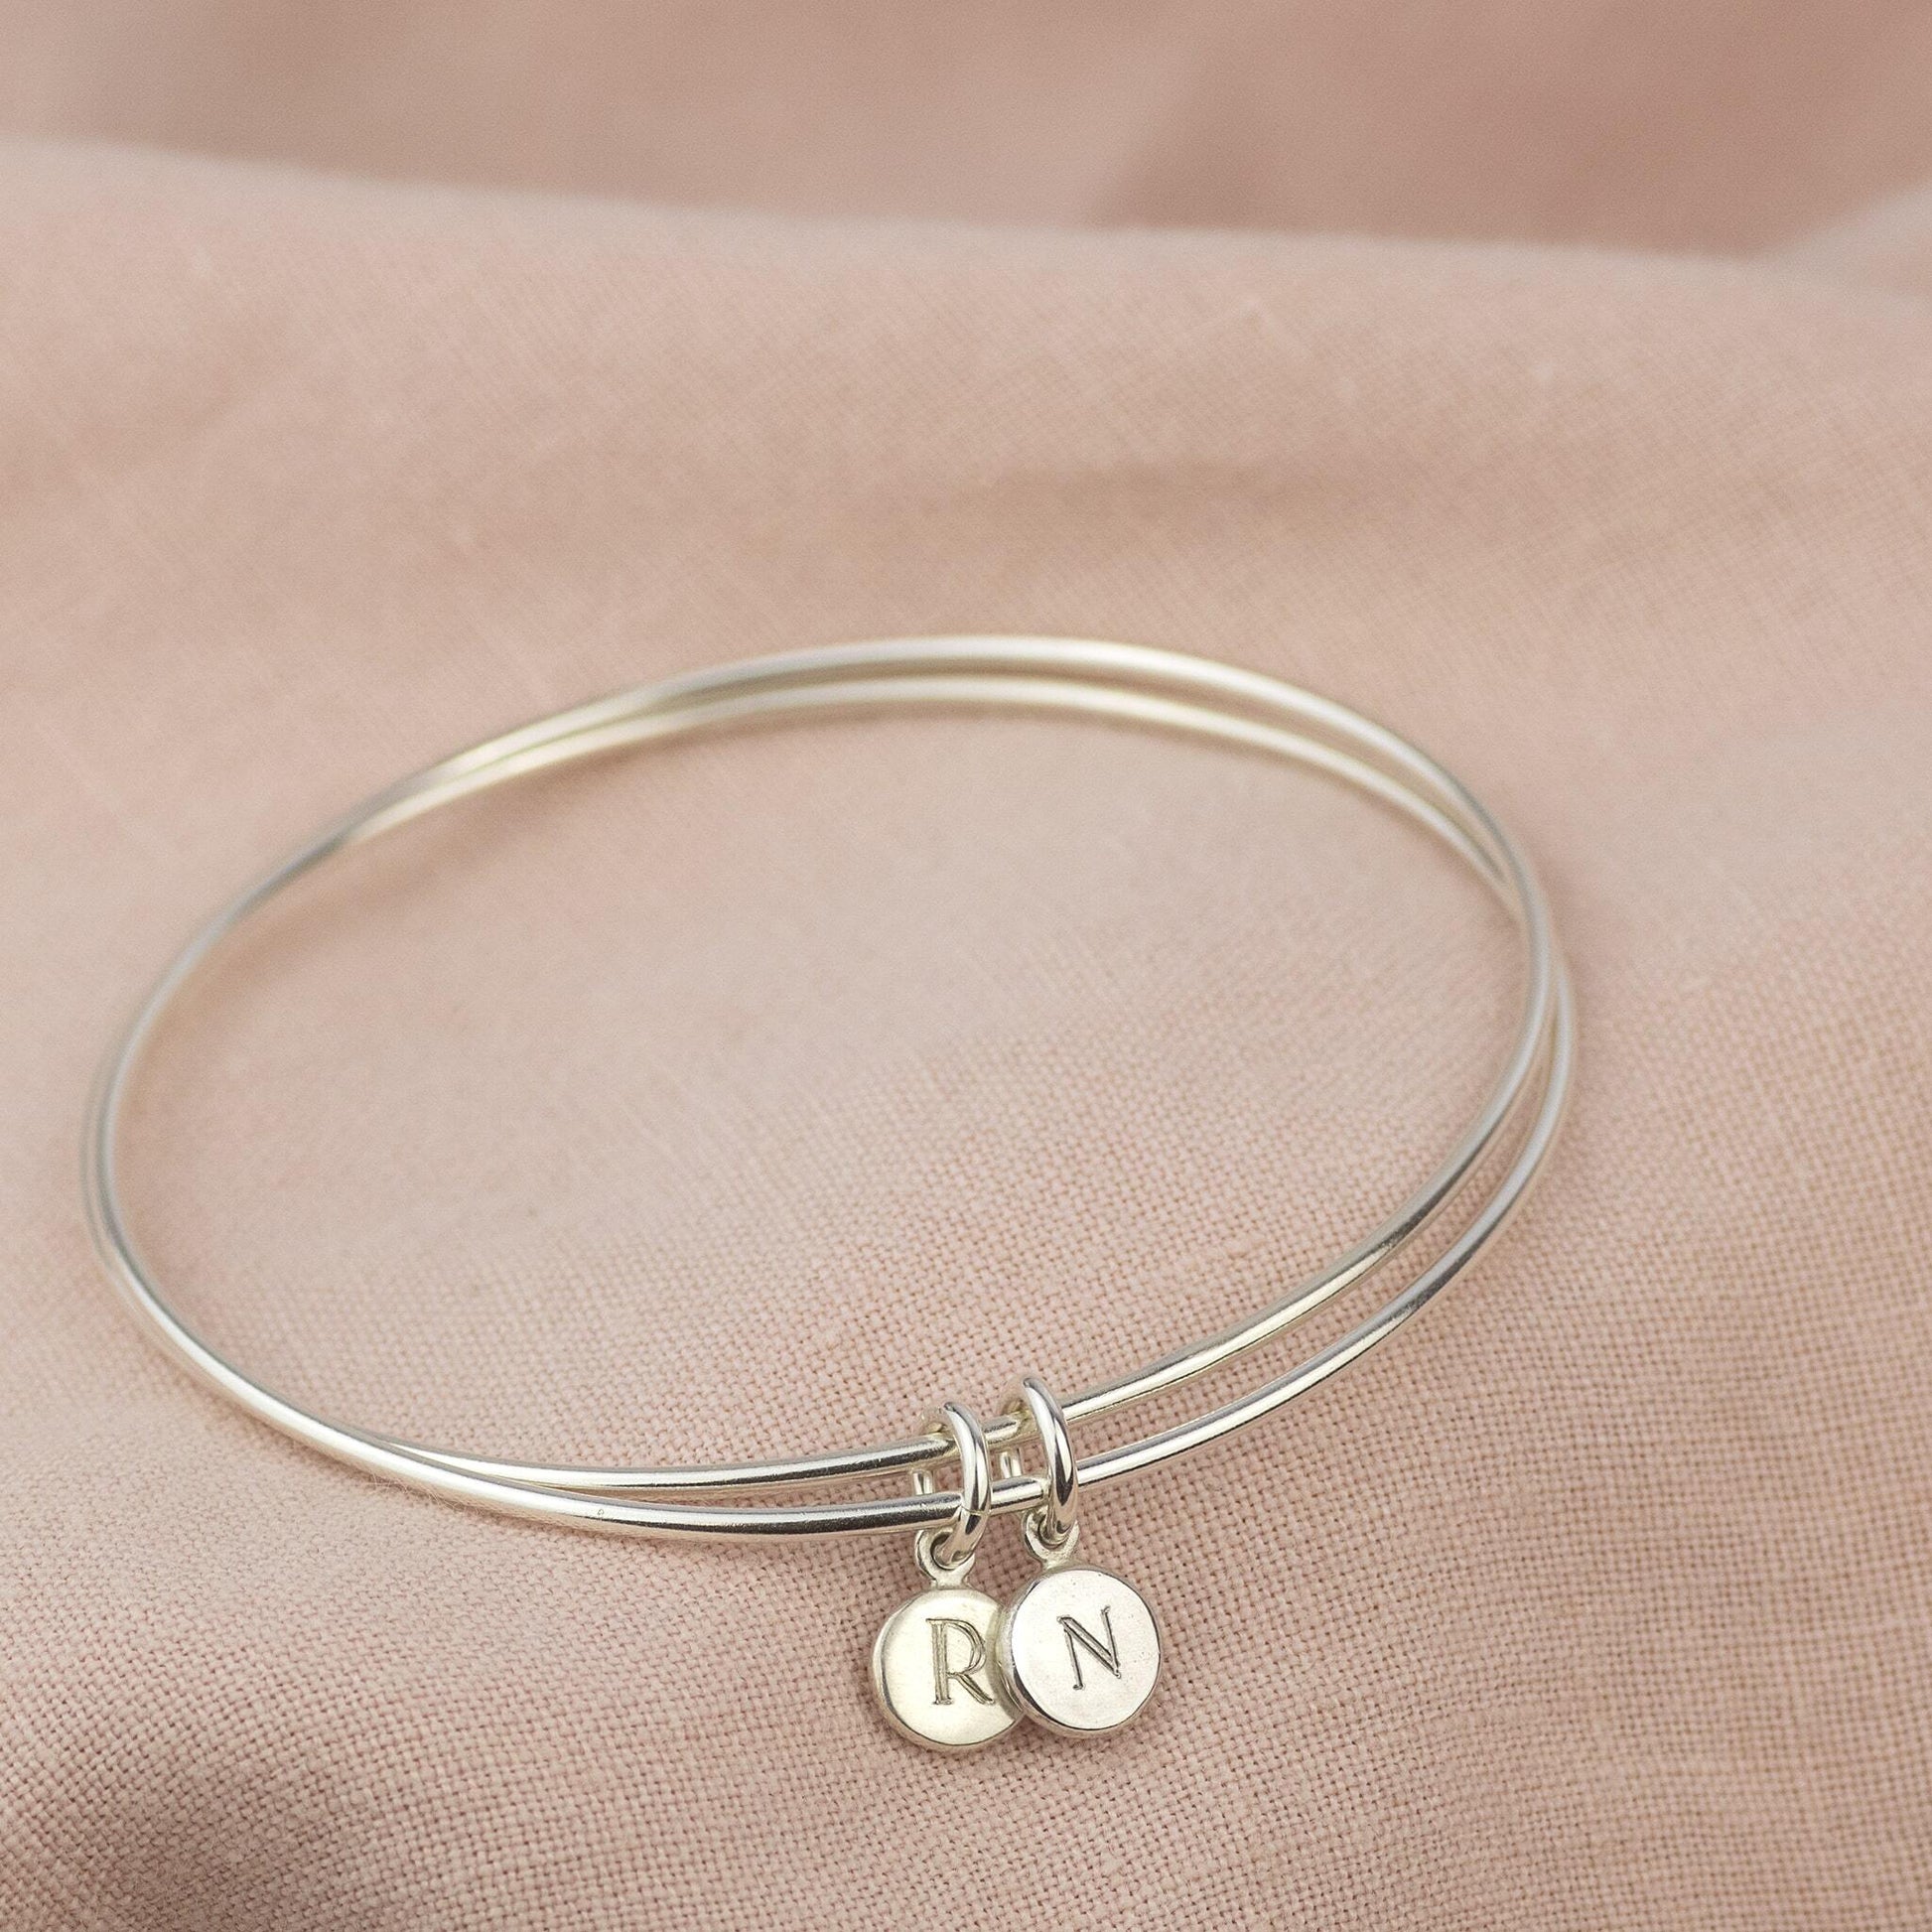 Personalised Sisters Bracelet - Double Linked Bangle - Linked for a Lifetime